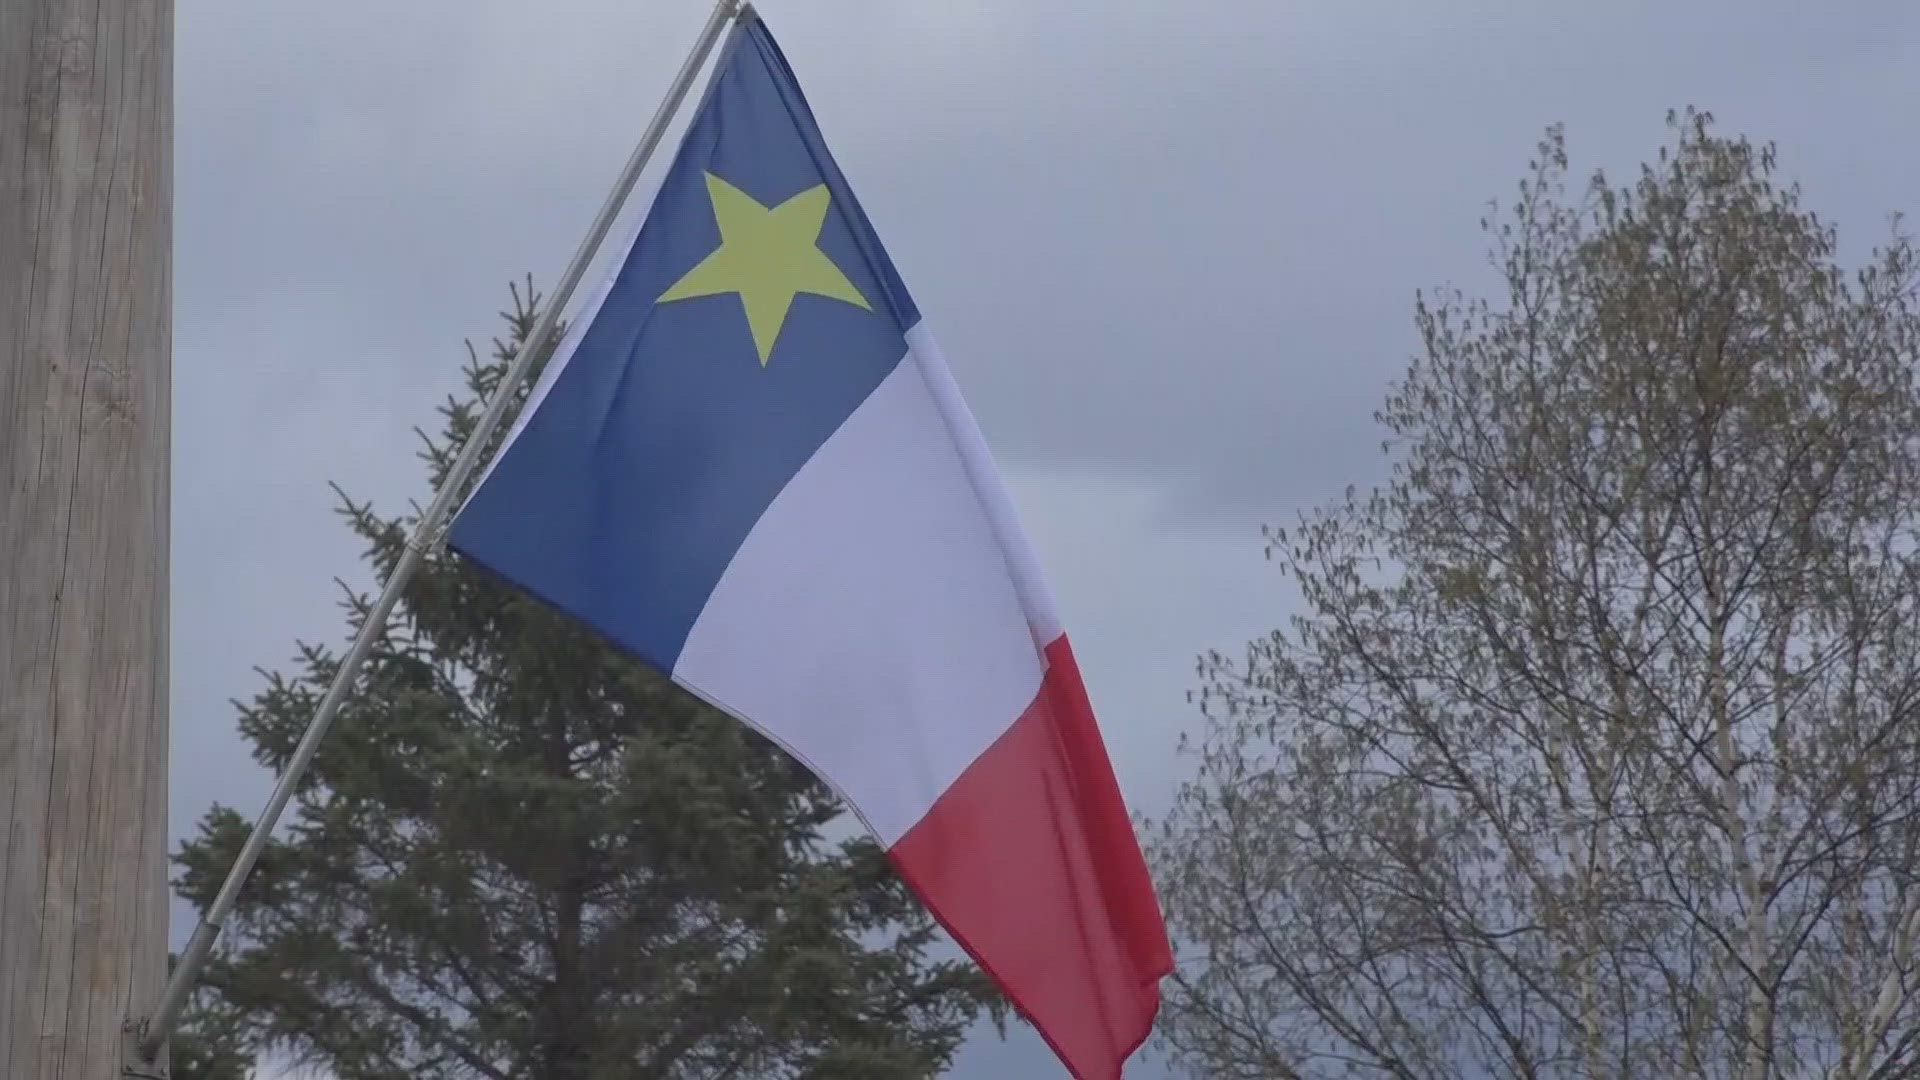 Acadian French has always been spoken there, but the number of people who speak the language has been dropping. A nonprofit there hopes to turn that trend around.